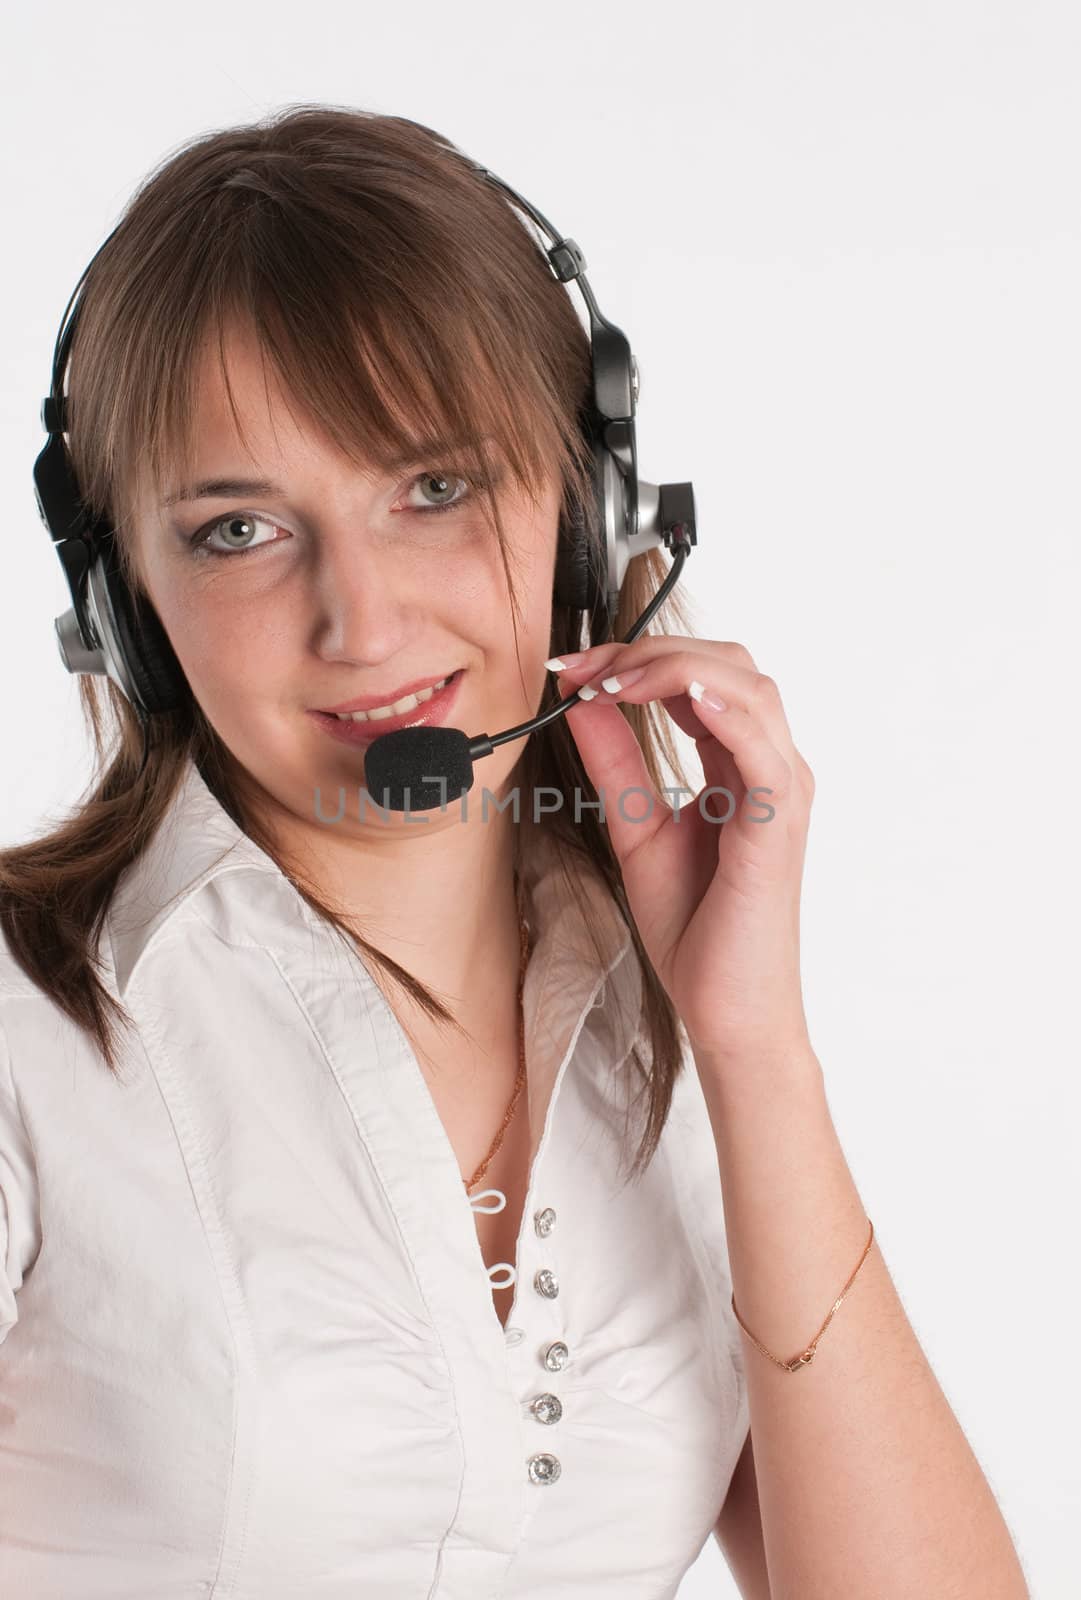 Closeup portrait of a happy young call centre employee  by Erchog